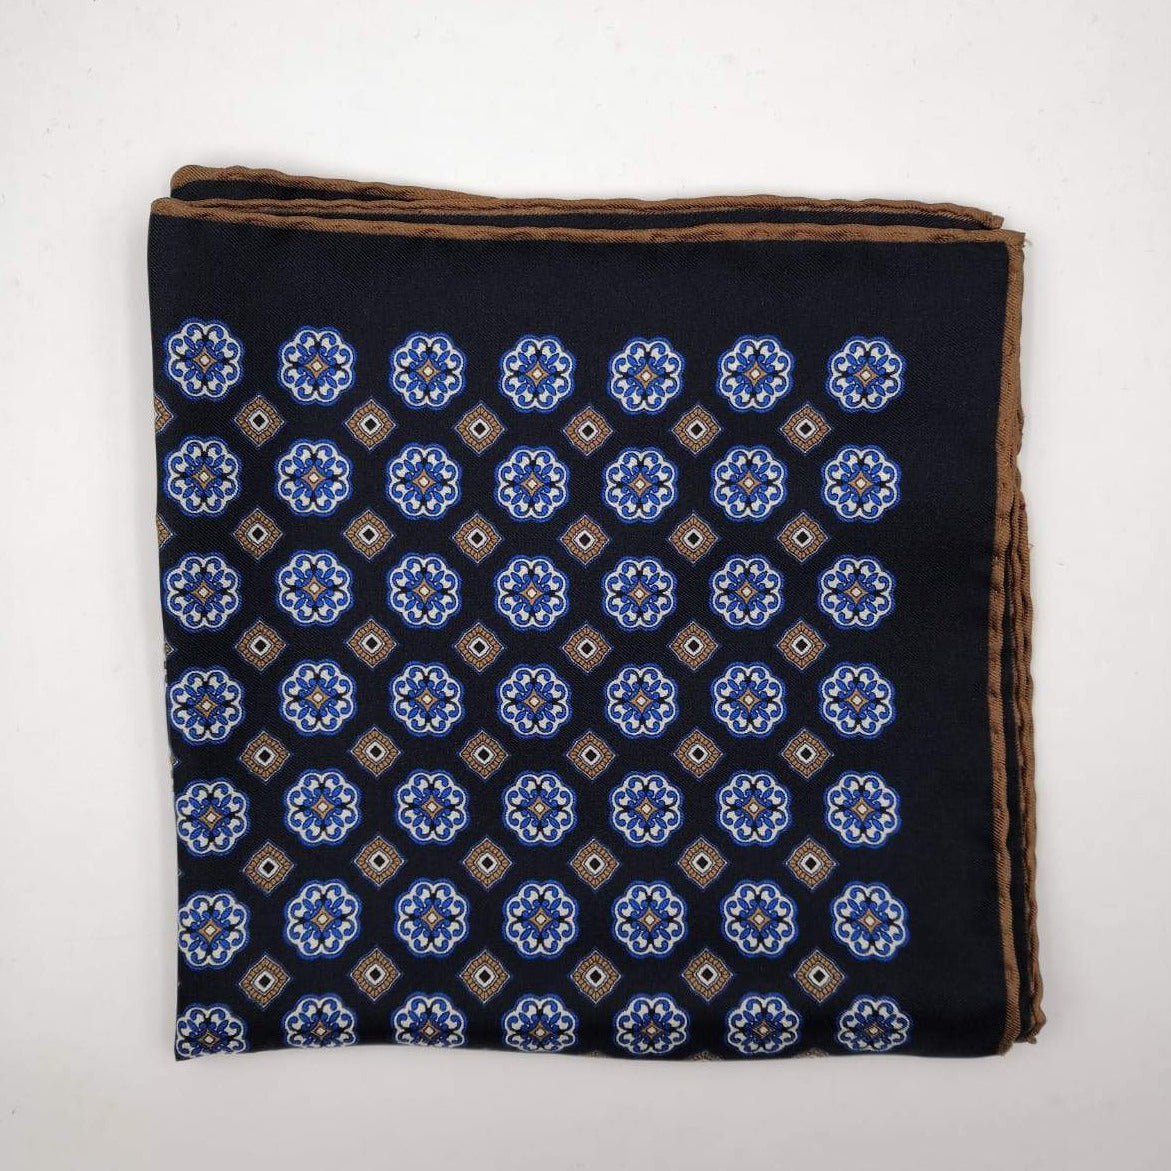 Cruciani & Bella 100% Silk Hand-rolled   Dark Blue and Brown Patterned  Motif  Pocket Square Handmade in Italy 39 cm X 39cm #4471